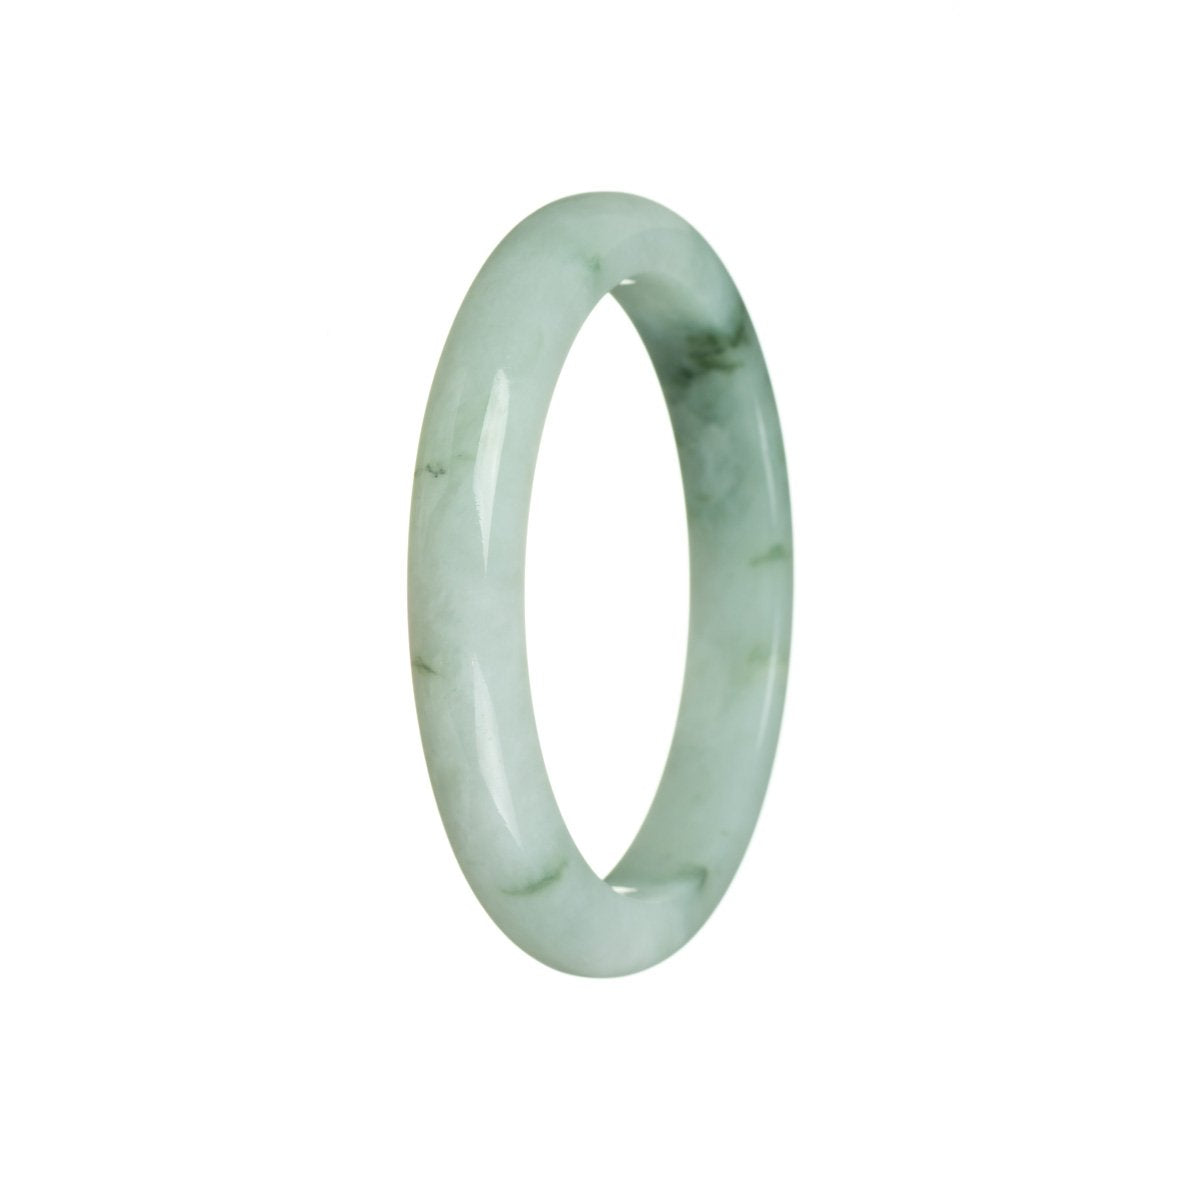 A close-up of an authentic Grade A pale green jadeite jade bracelet. The bracelet is semi-round in shape and measures 55mm in diameter. It features a beautiful pattern on the surface. This exquisite piece of jewelry is offered by MAYS GEMS.